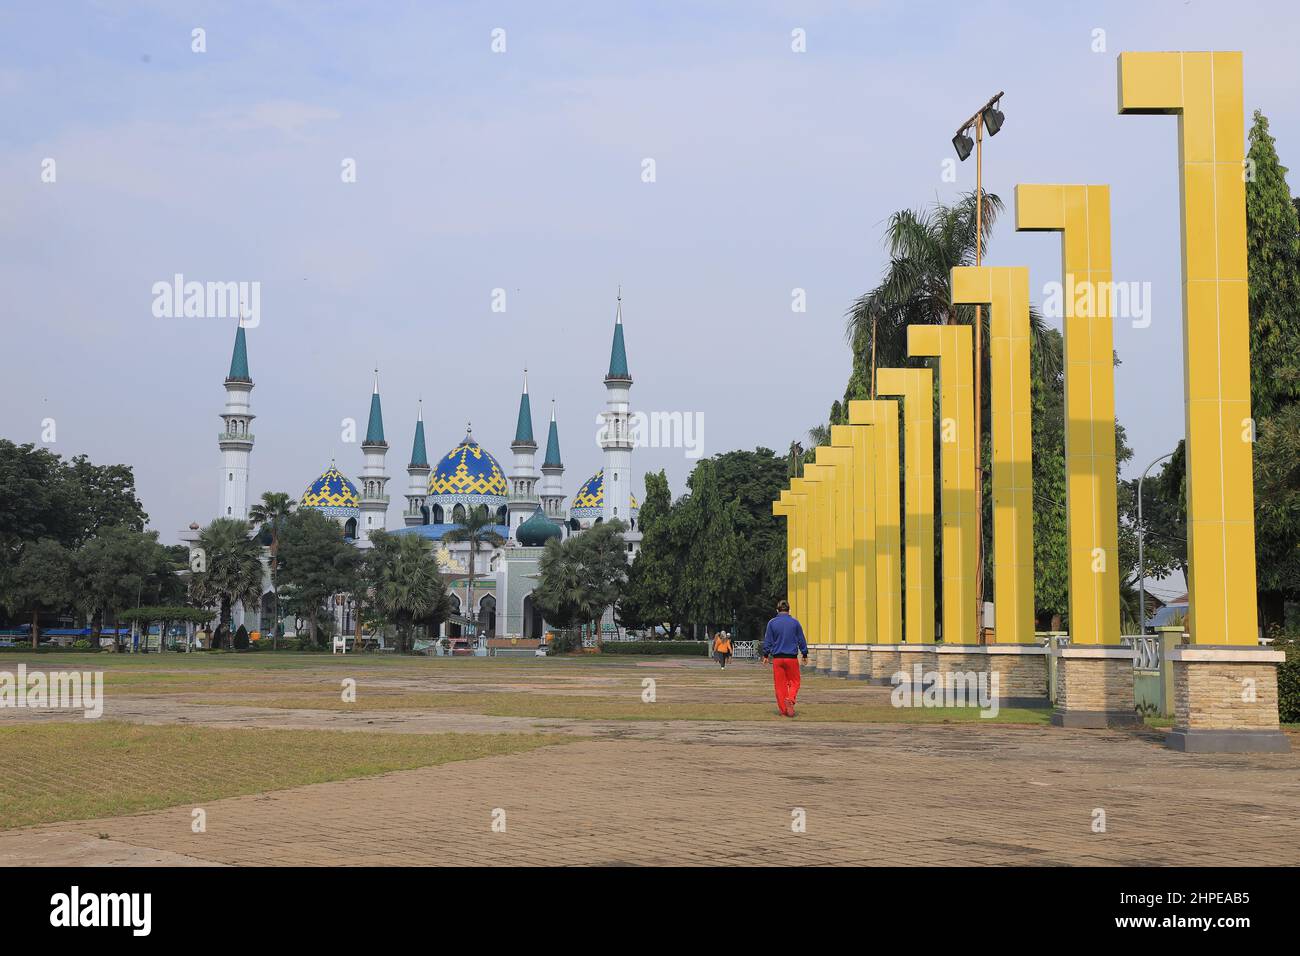 Tuban, Indonesia - January 25, 2022: The Great Mosque of Tuban (Masjid Agung) Stock Photo